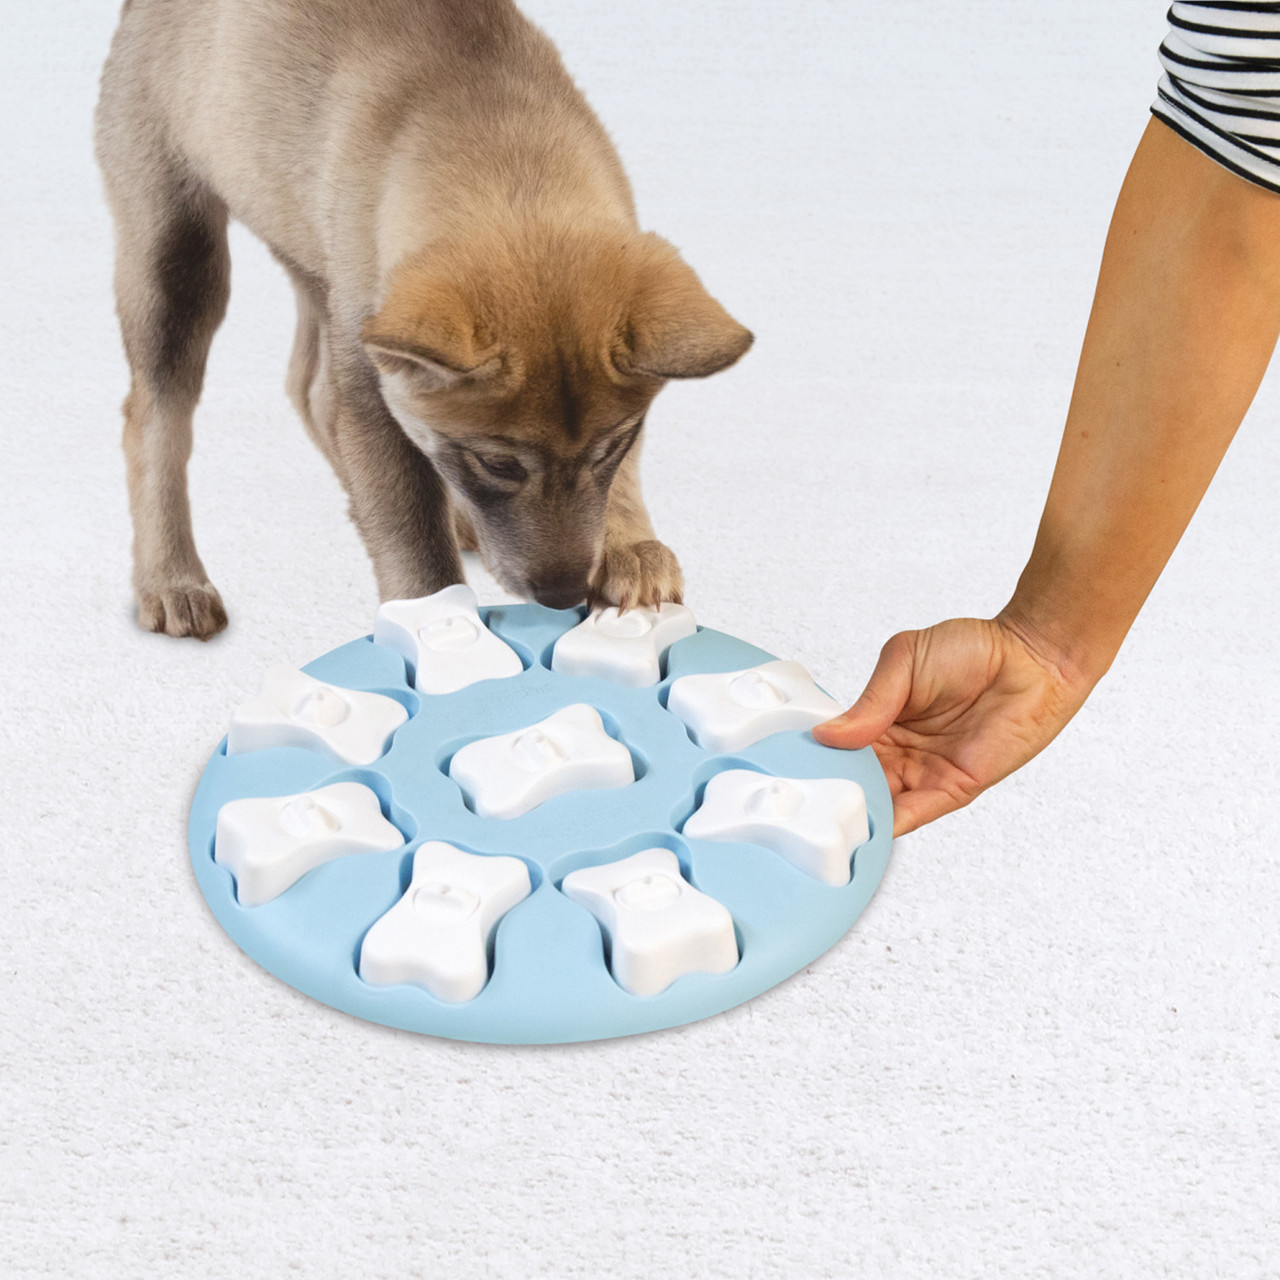 MEIJIEM meijiem dog enrichment toys, dog puzzle toys, enrichment for puppy, small  dogs, mentally stimulating and boredom, with 8 carr